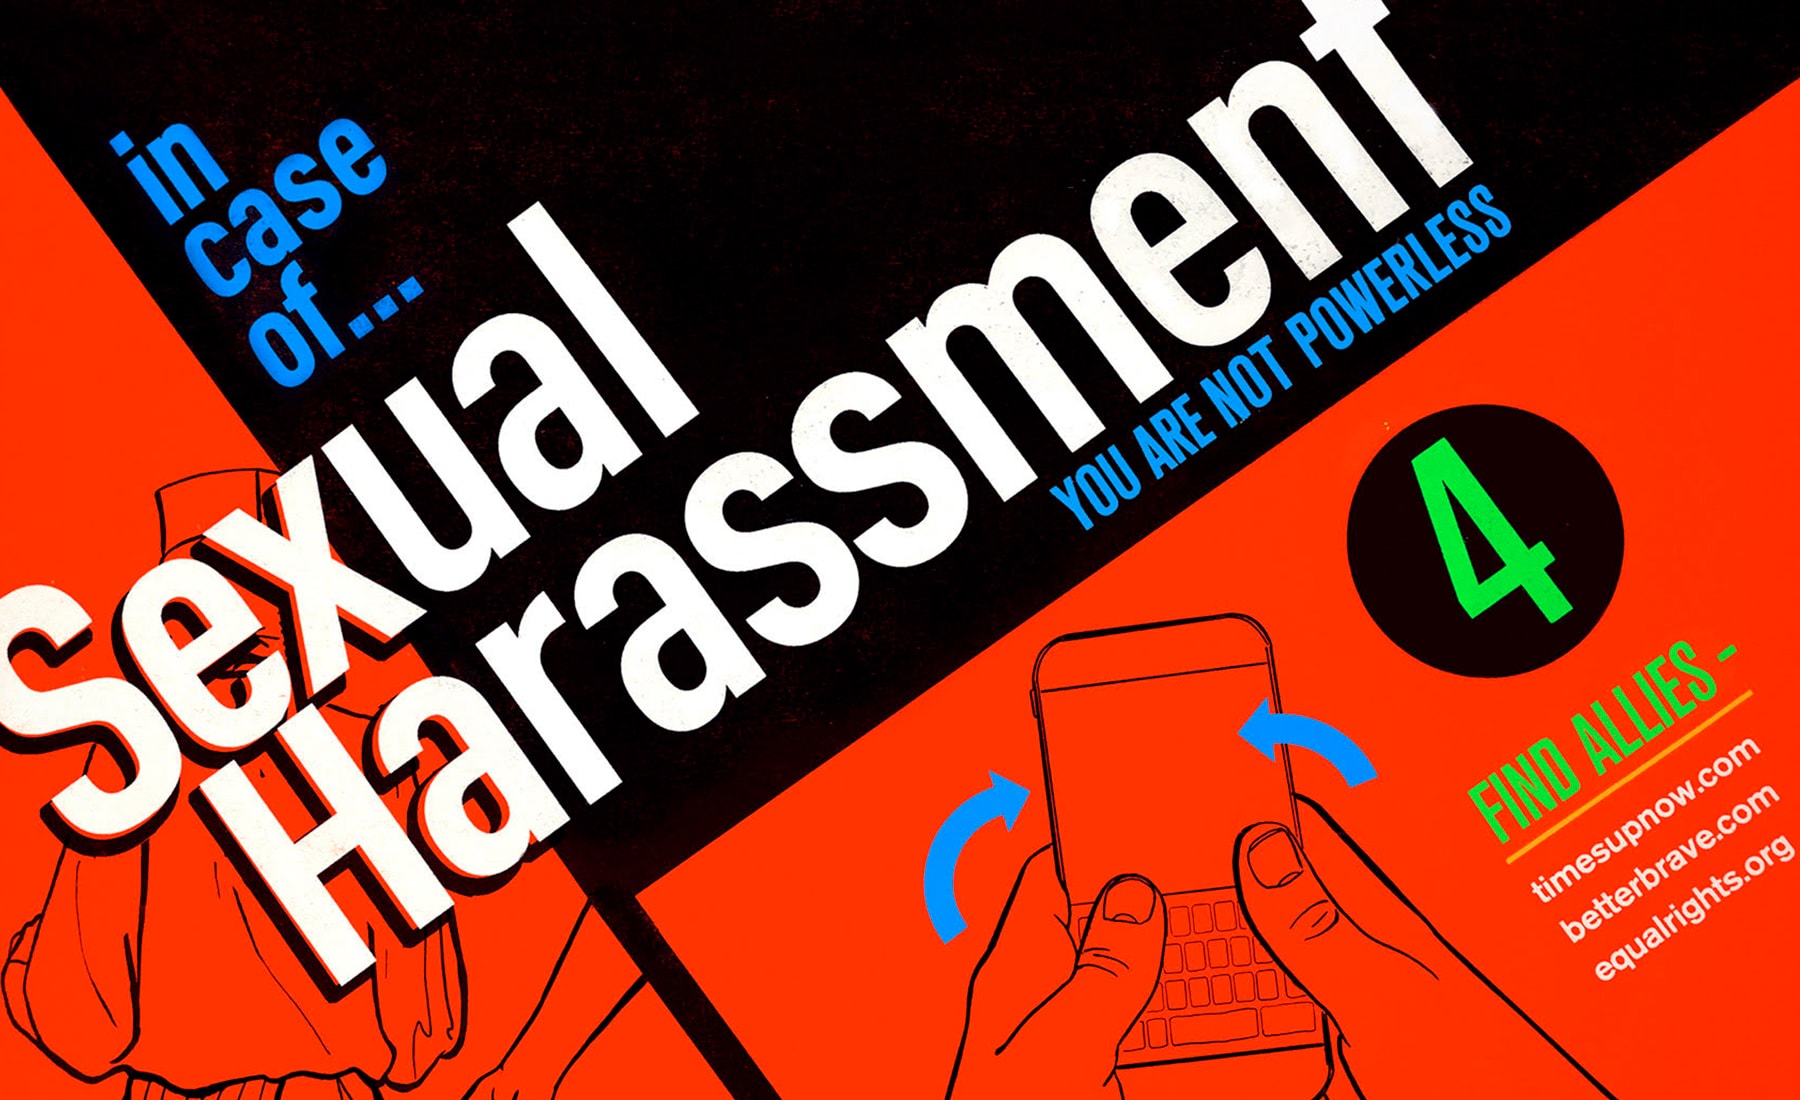 In case of sexual harassment: Kelli Anderson designs educational poster / Forward ...1800 x 1100